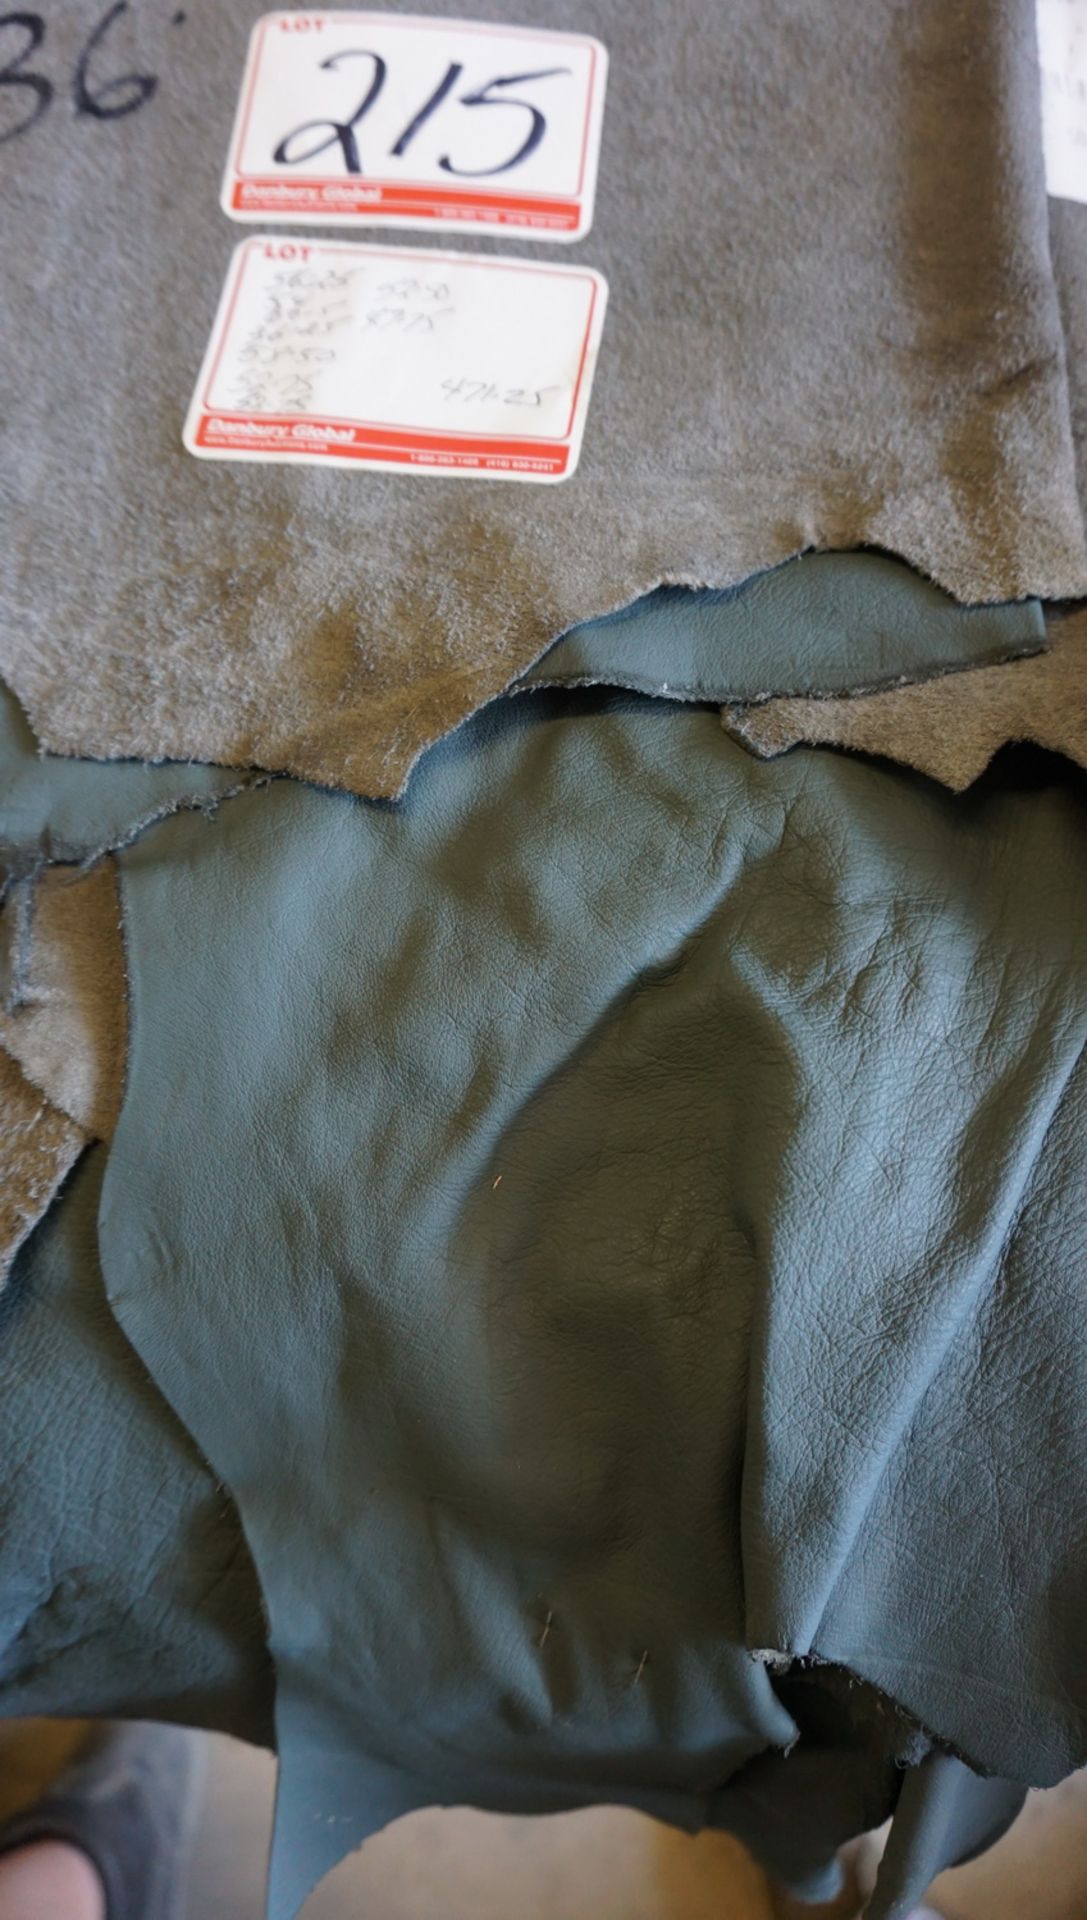 LOT - 471 SQFT - GREY UPHOLSTERY LEATHER